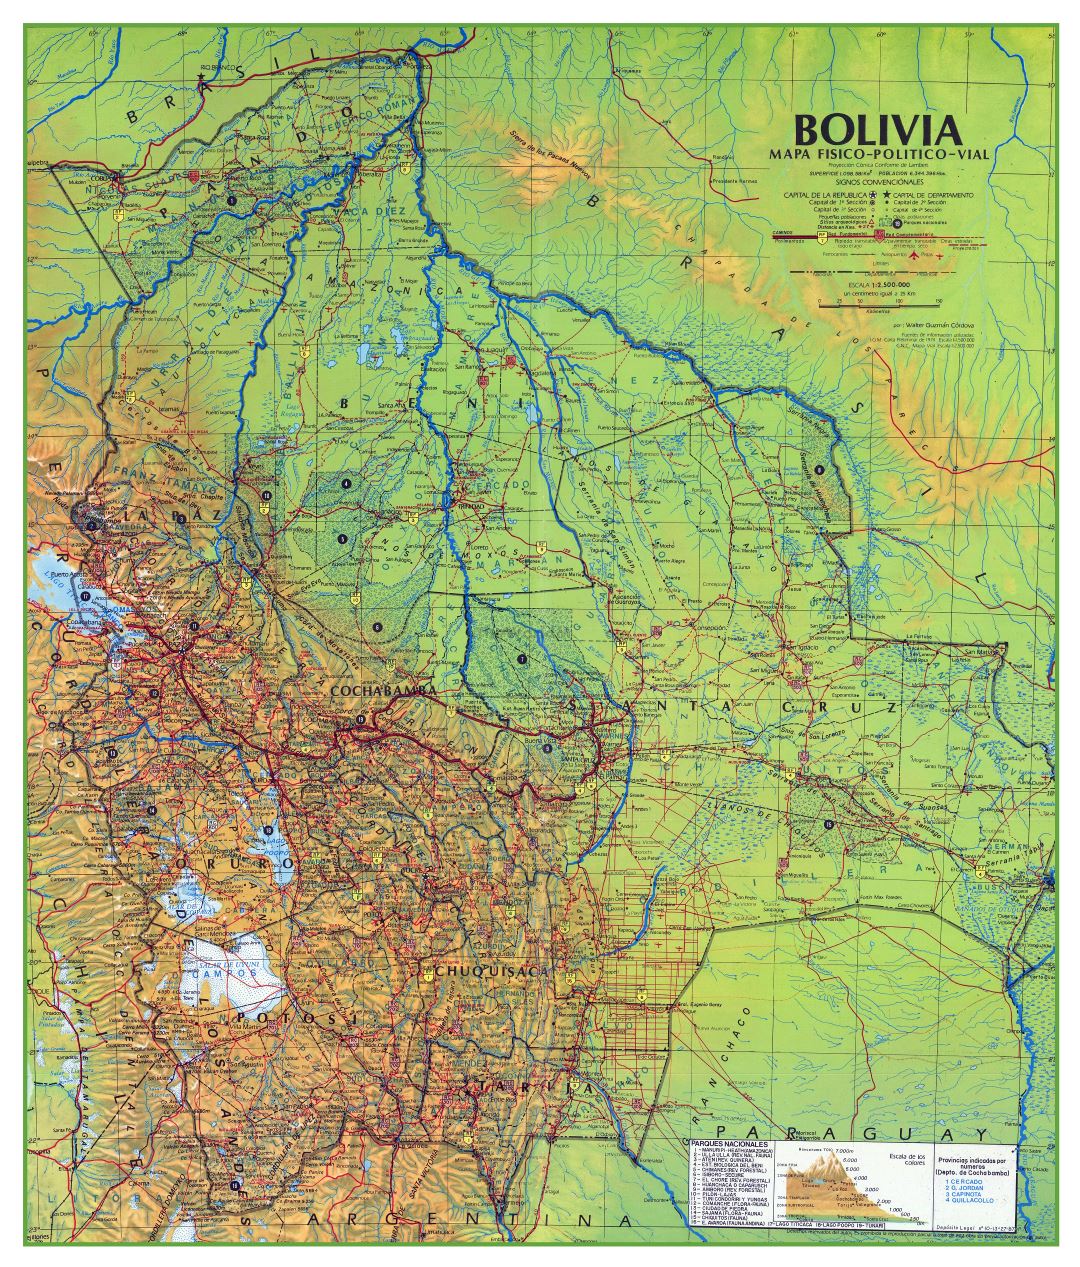 Large scale physical and political map of Bolivia with roads, cities, towns, airports and other marks